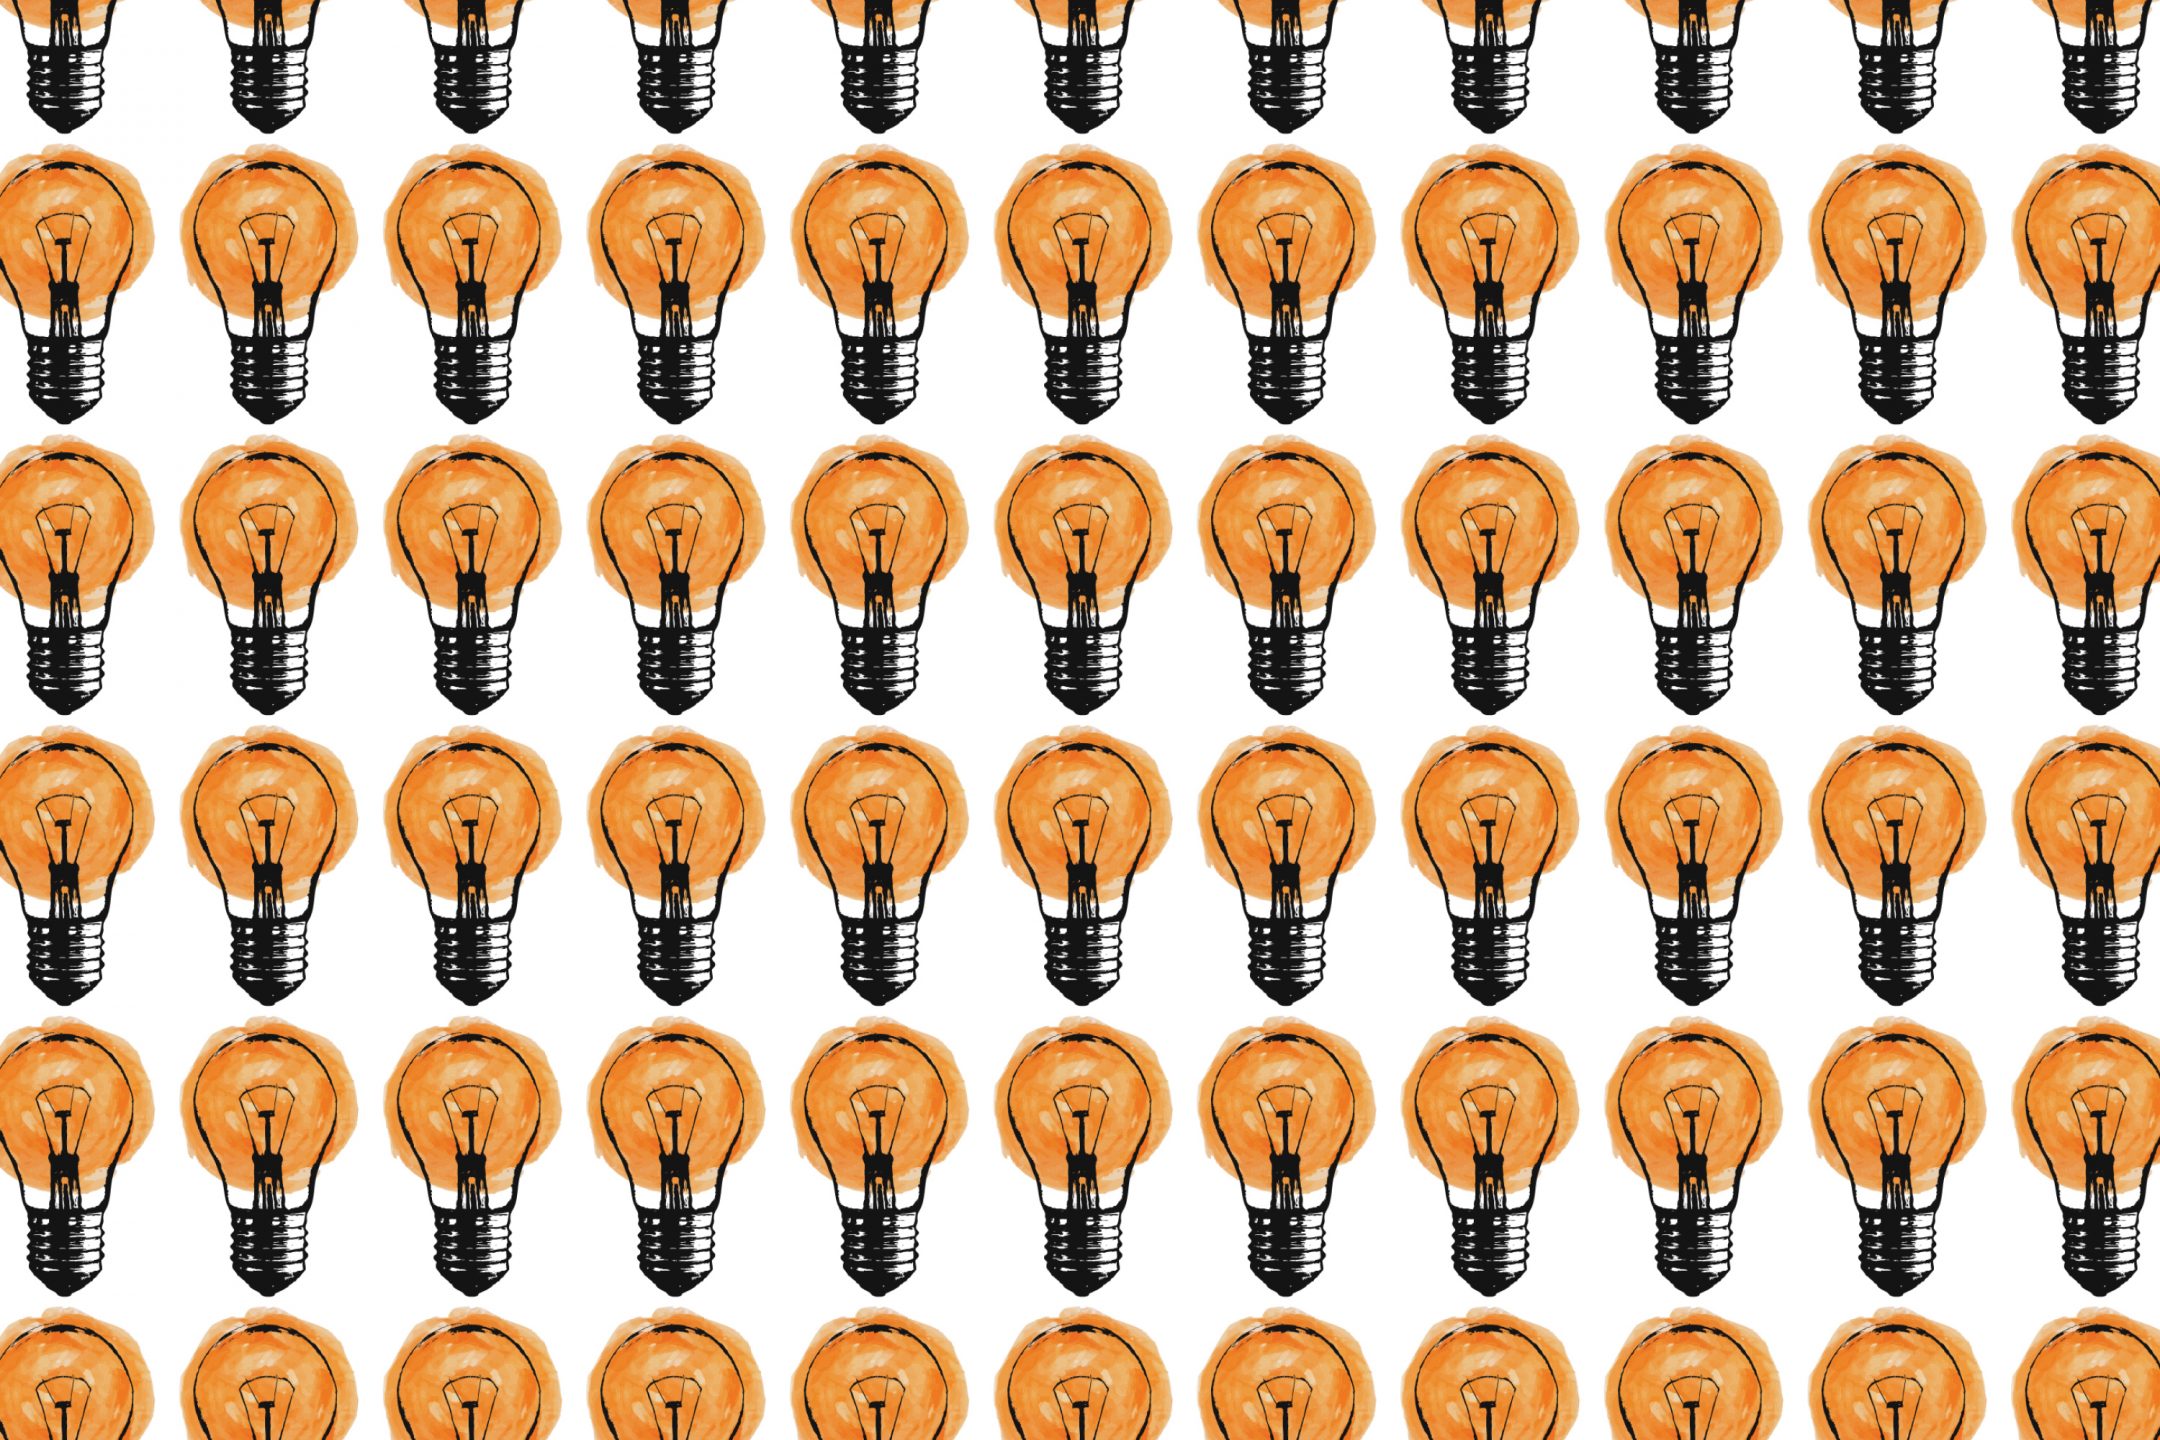 lightbulb graphics repeated multiple times in rows and columns